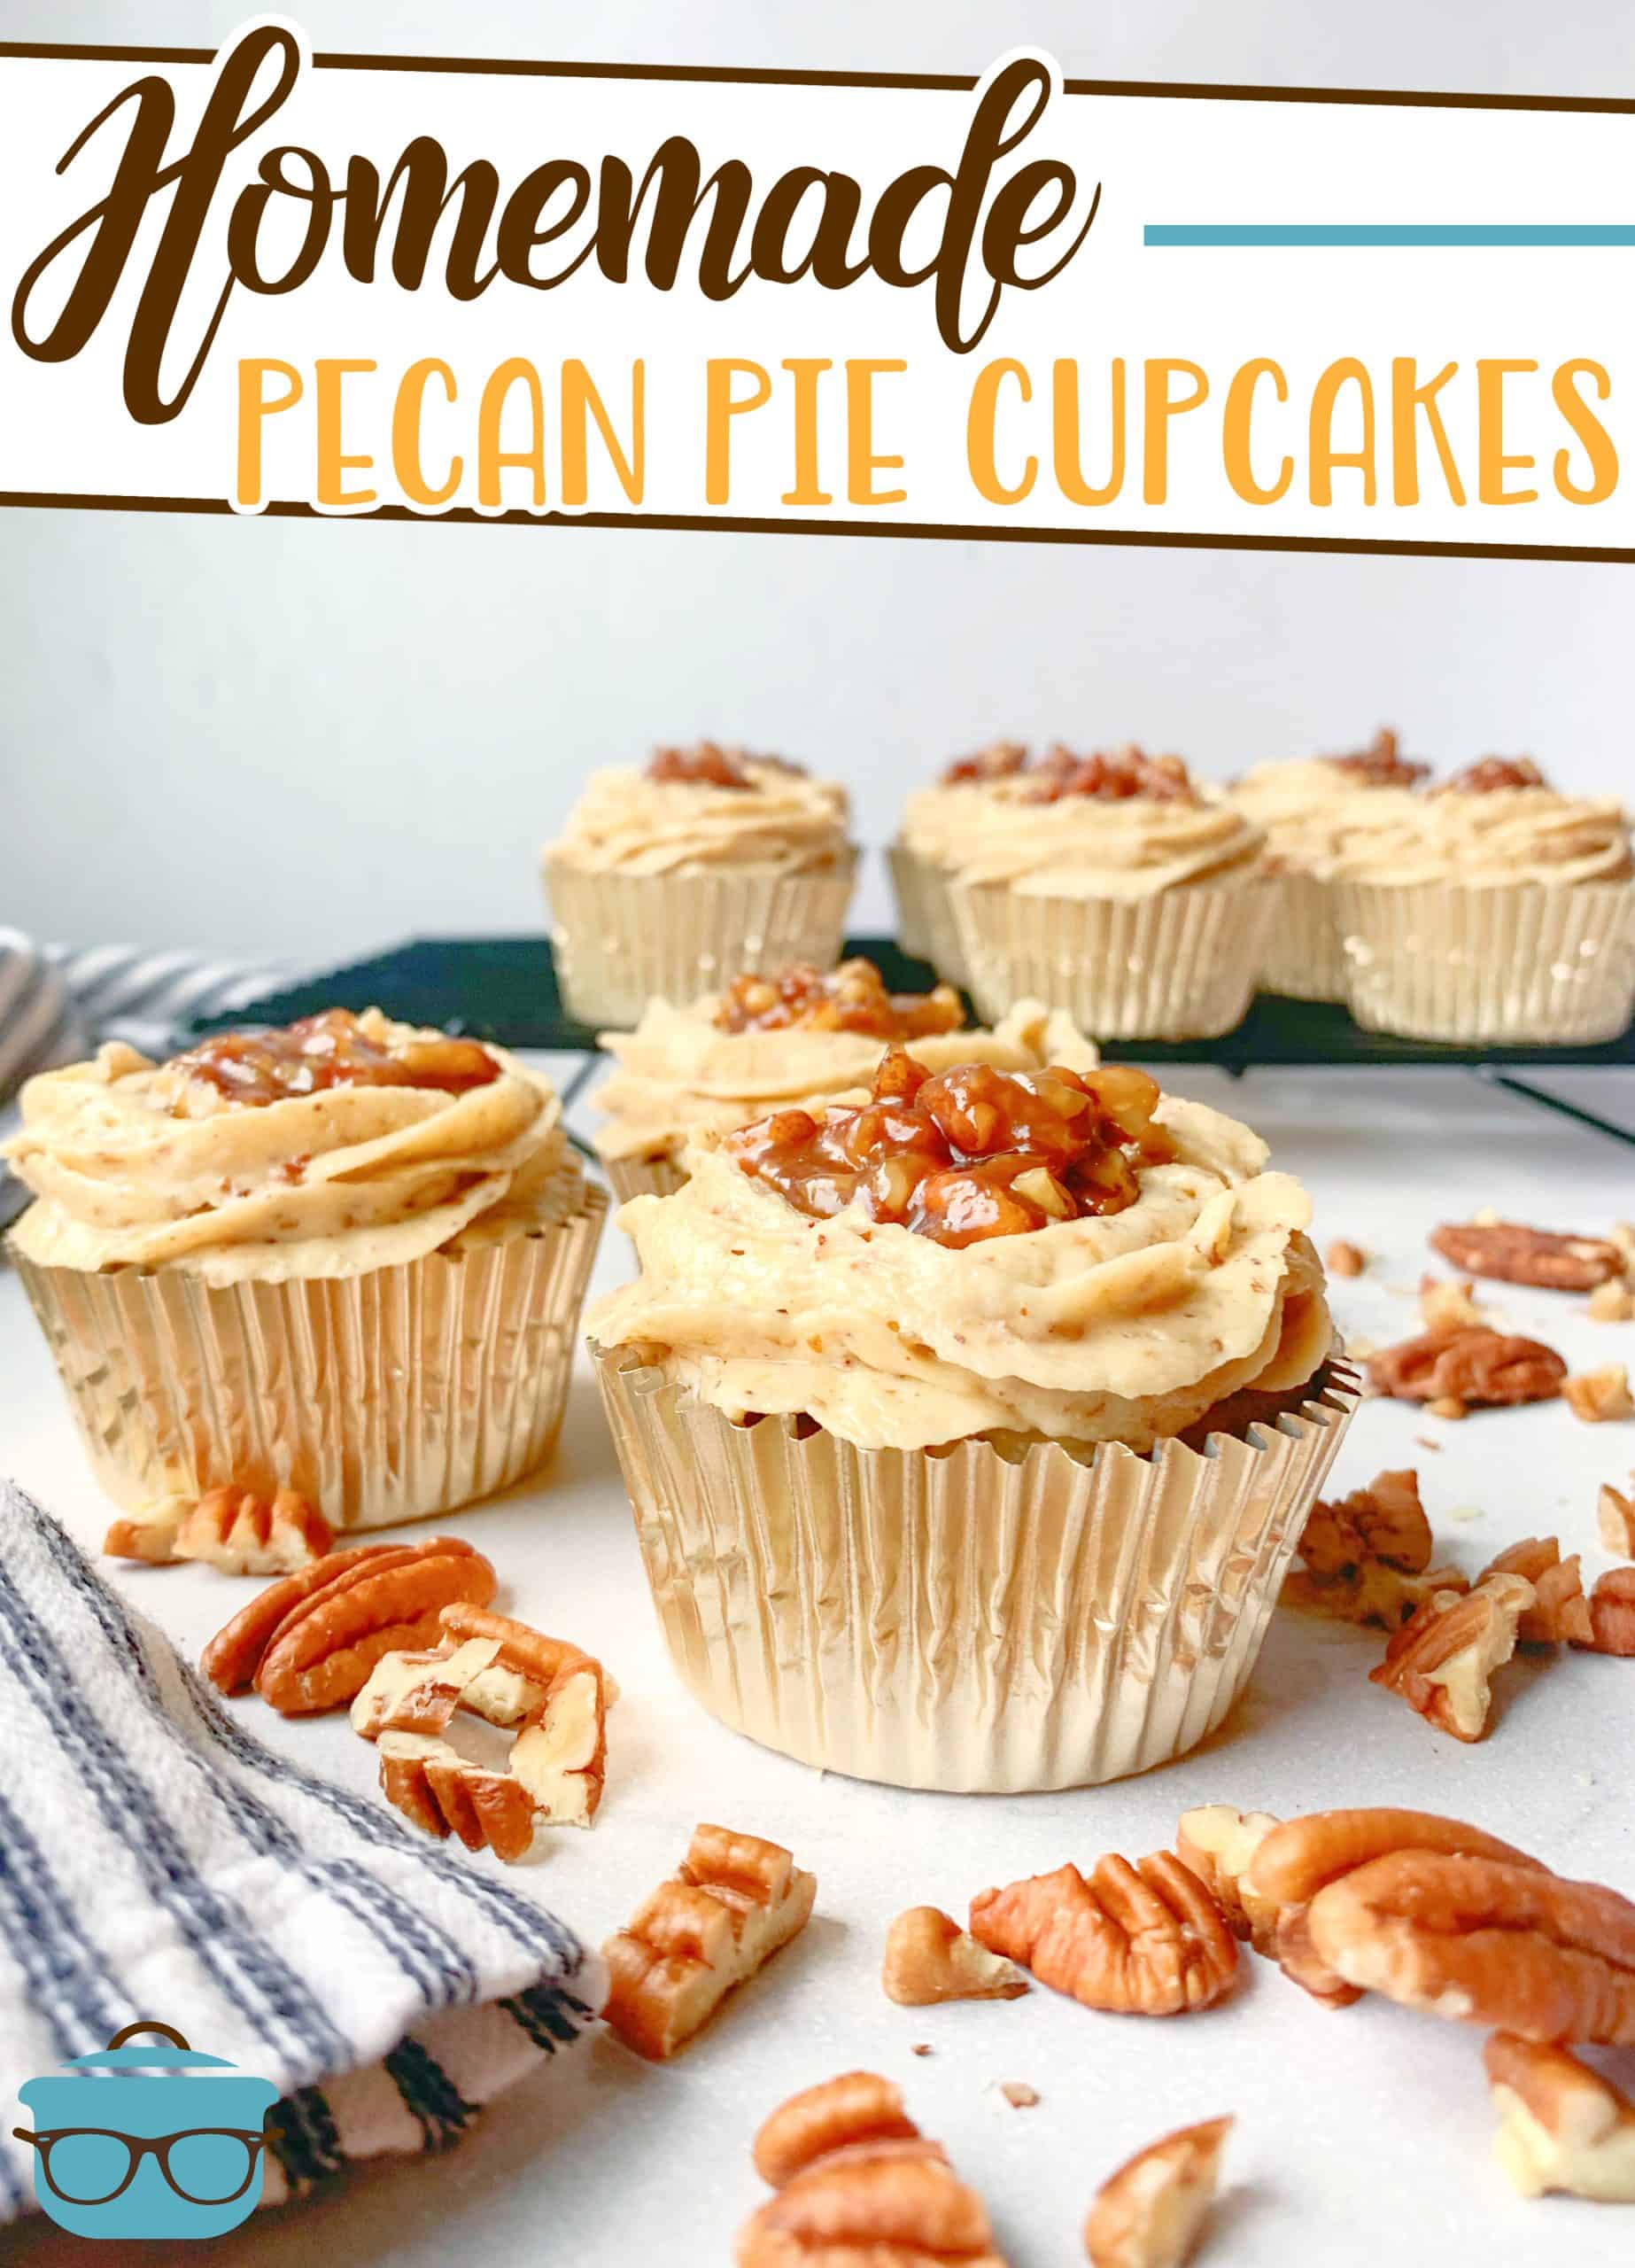 Homemade Pecan Pie Cupcakes, shown on a marble surface with pecans scattered around.